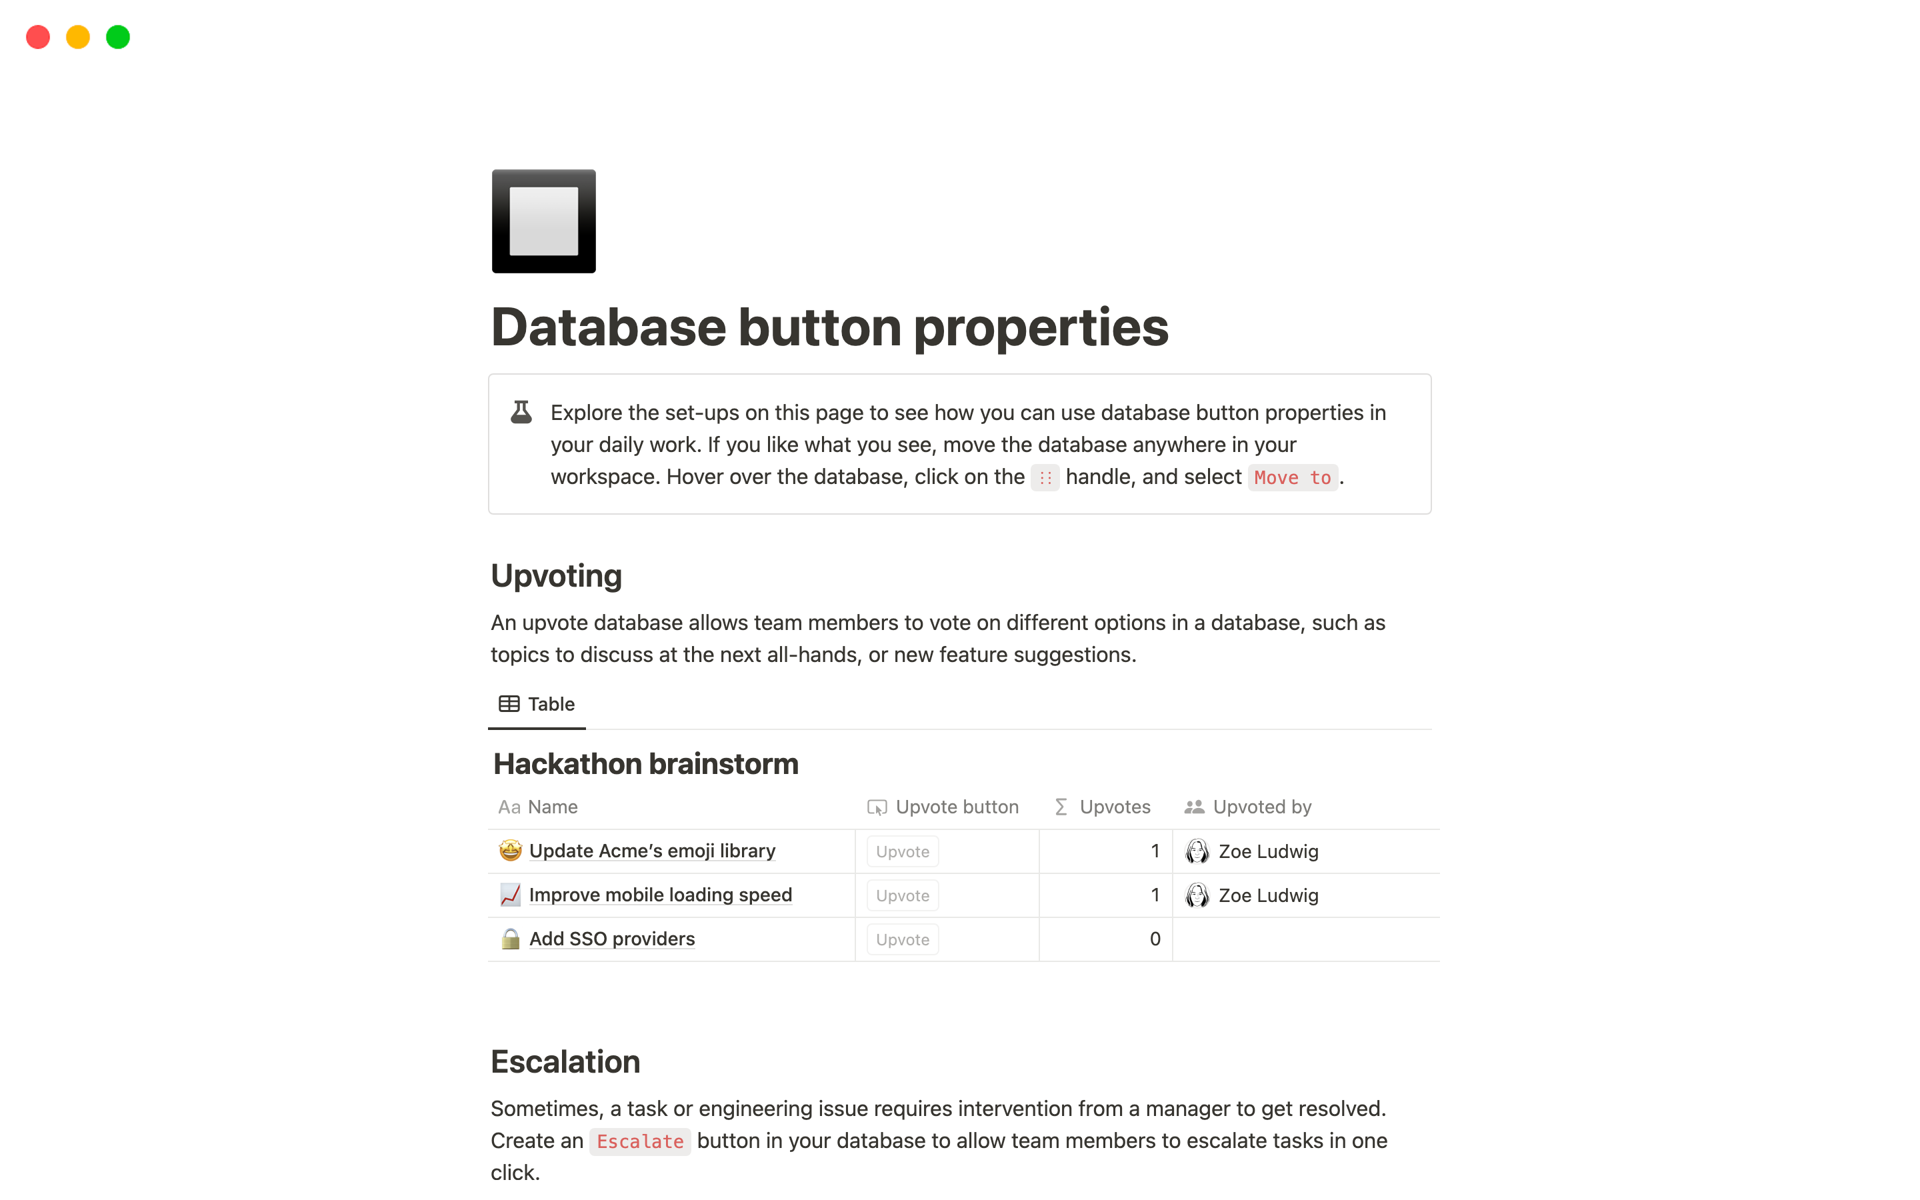 Use this template to experience different ways to use database button properties in Notion — in upvotes, escalations, and approvals. When you're ready, duplicate these setups into your docs and project plans.
